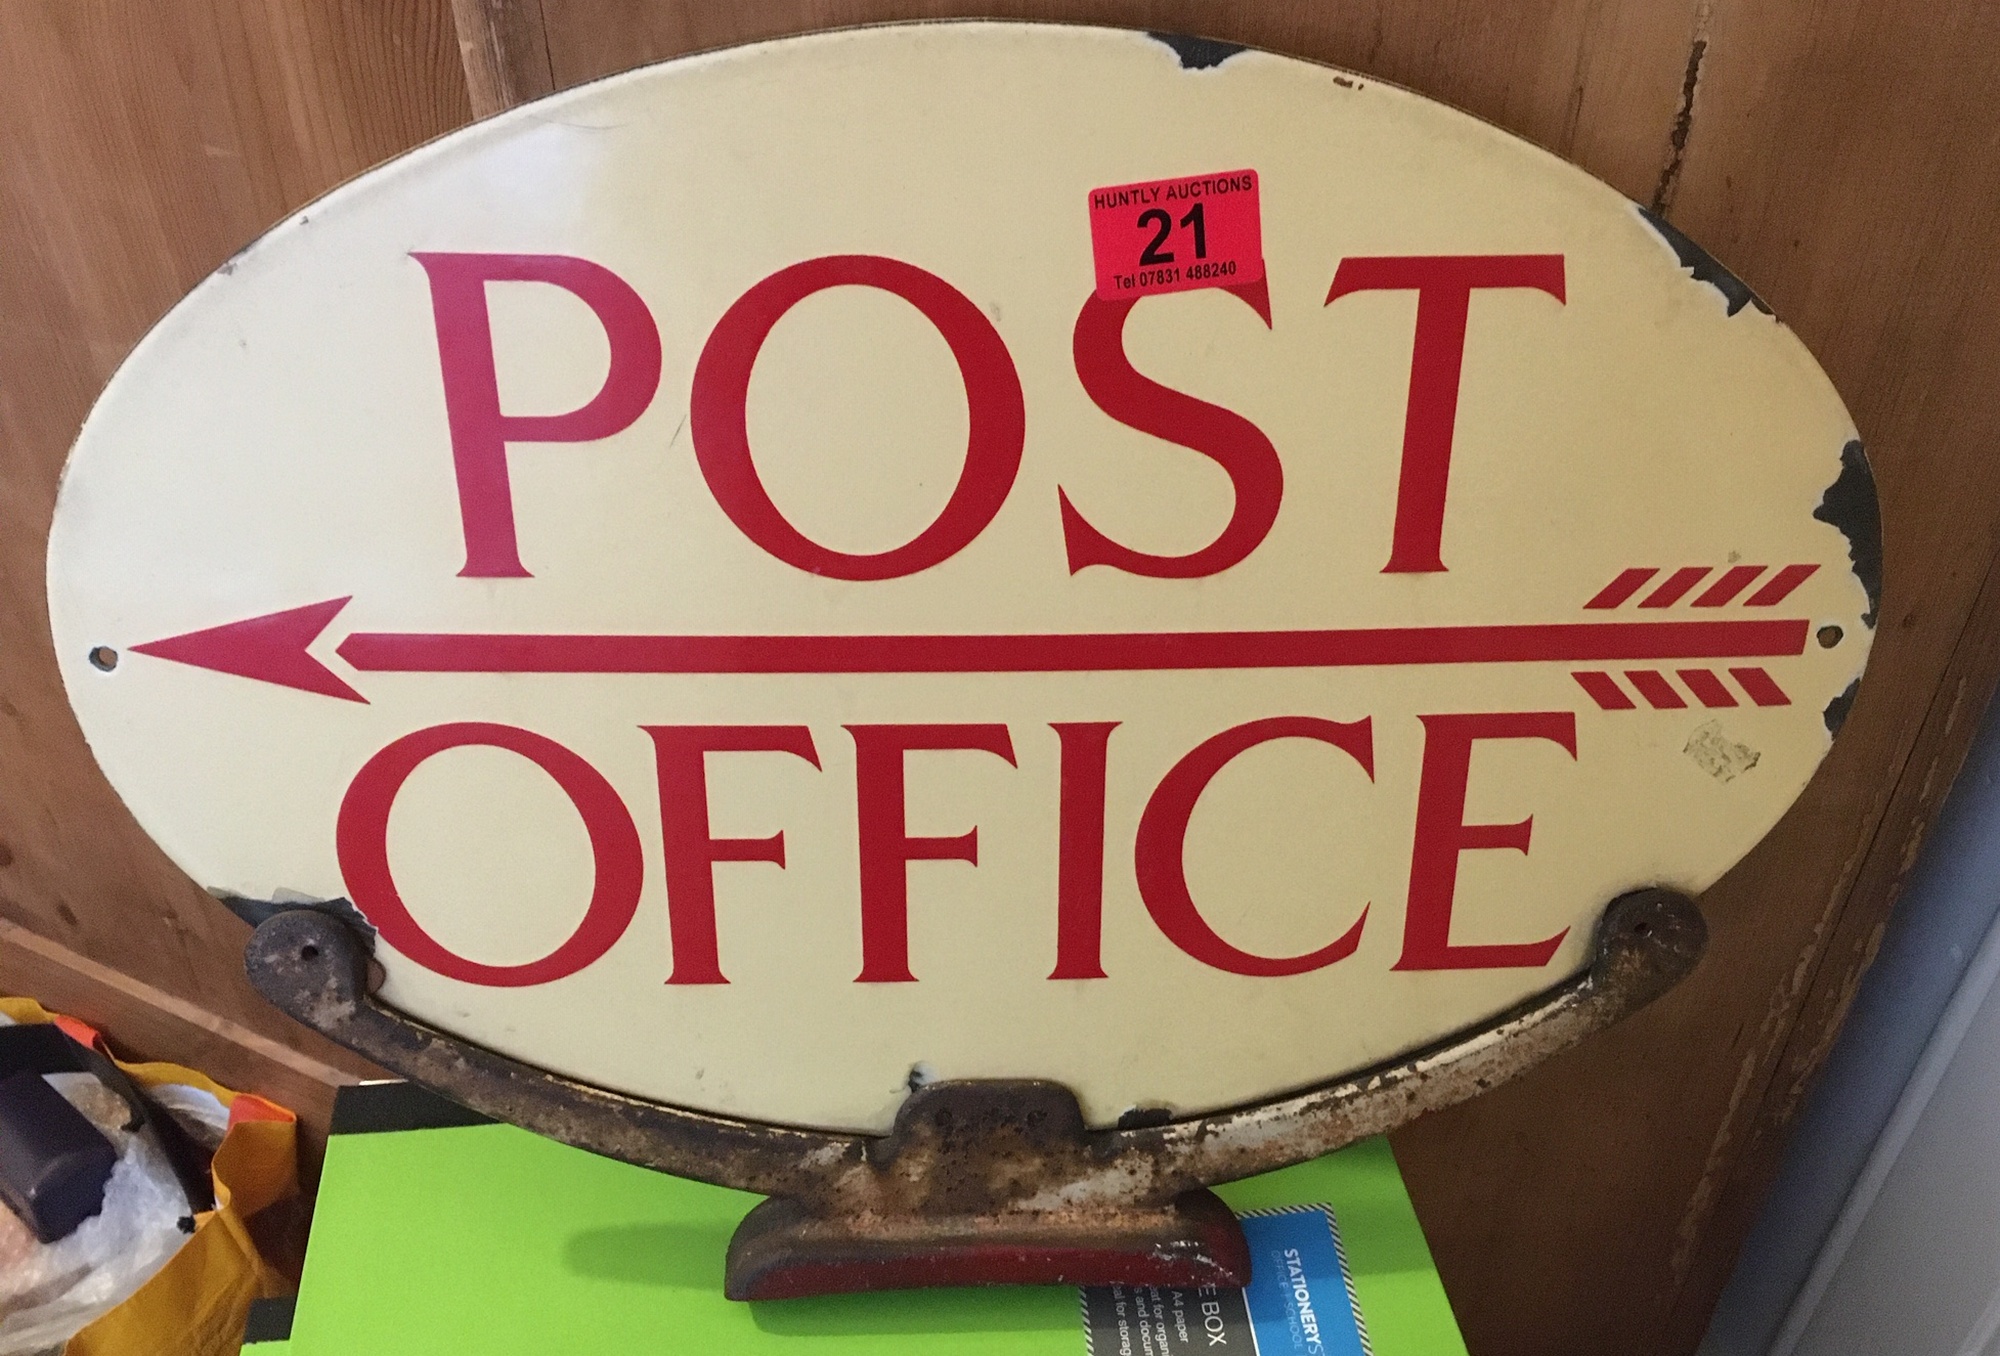 Vintage Post Office Double Sided Enamel Sign - 17 1/2" x 12 1/2".